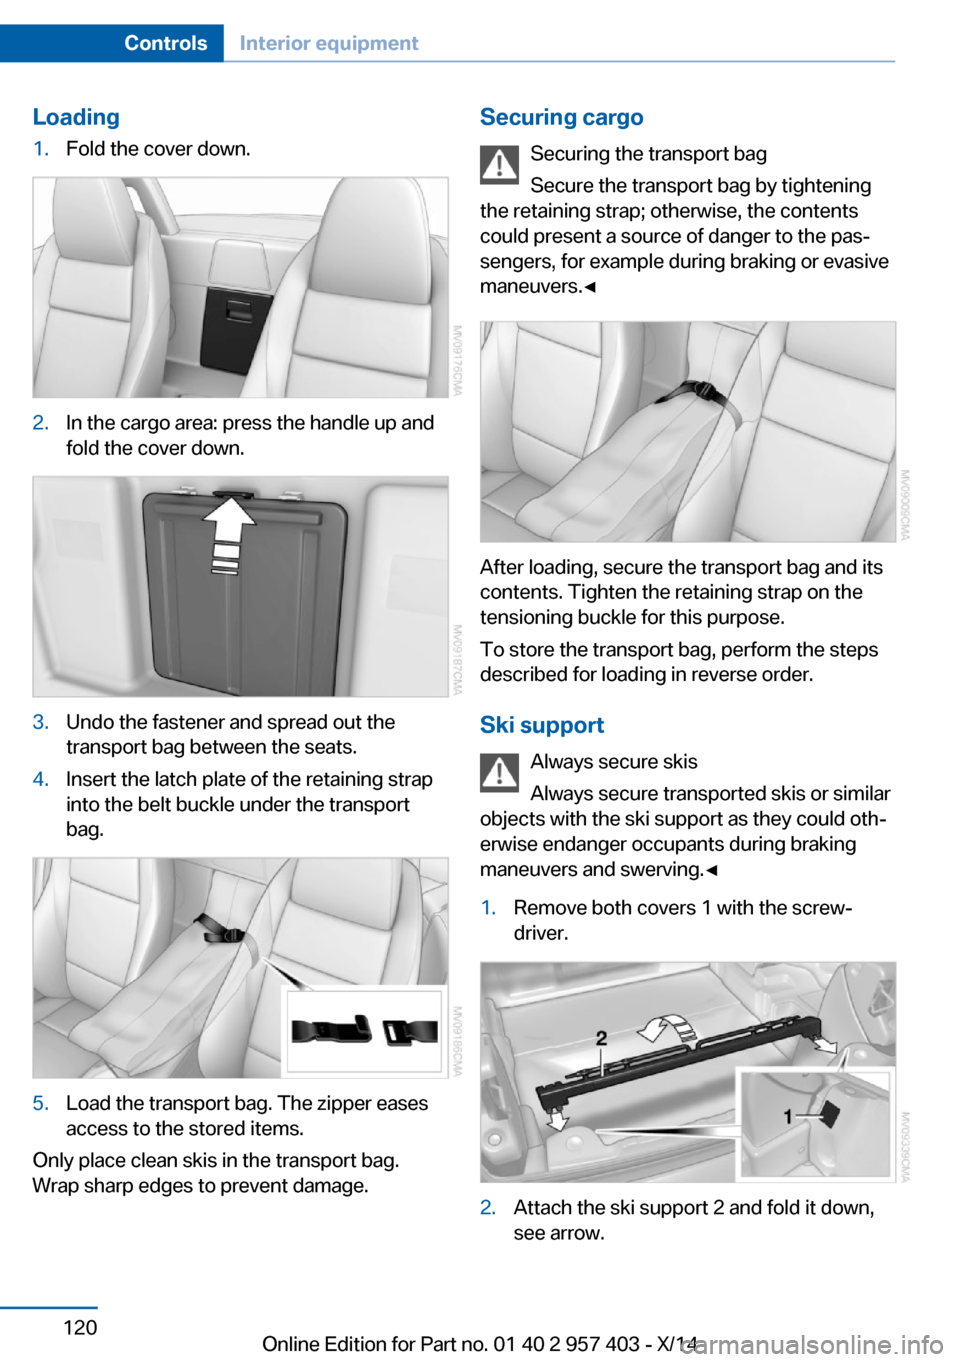 BMW Z4 2014 E89 Owners Manual Loading1.Fold the cover down.2.In the cargo area: press the handle up and
fold the cover down.3.Undo the fastener and spread out the
transport bag between the seats.4.Insert the latch plate of the ret